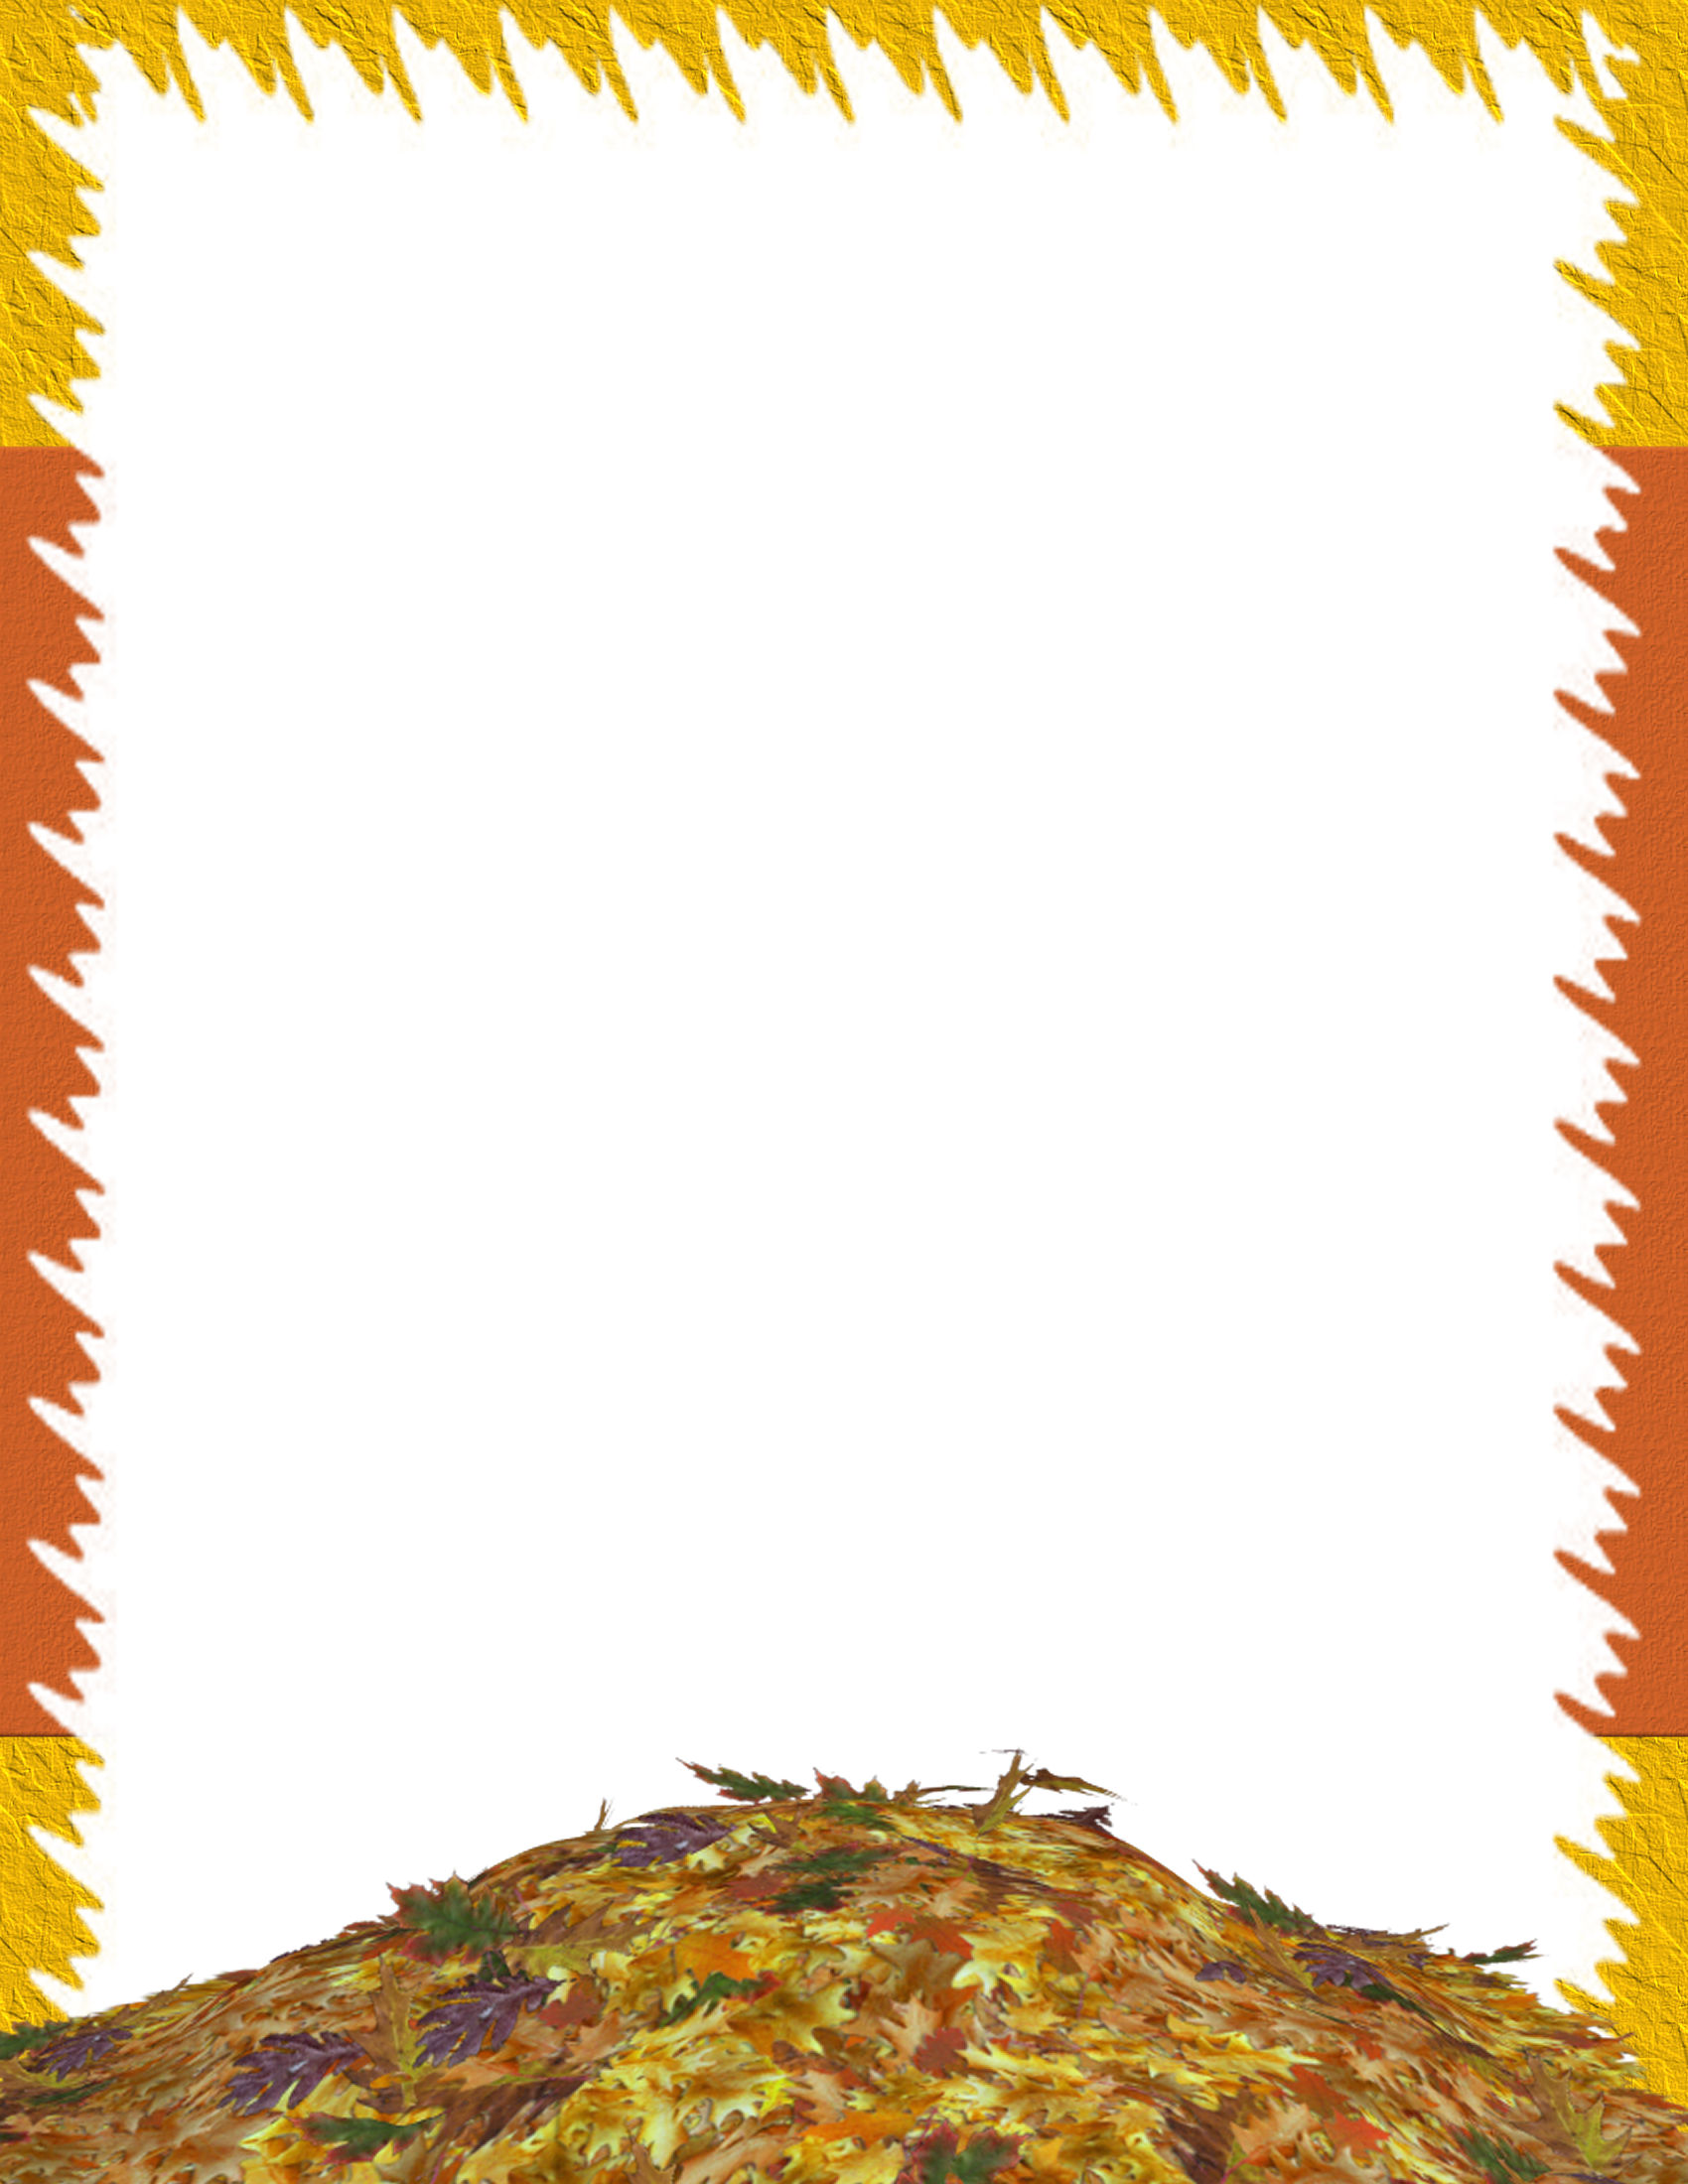 Autumn or Fall 3 Template Downloads